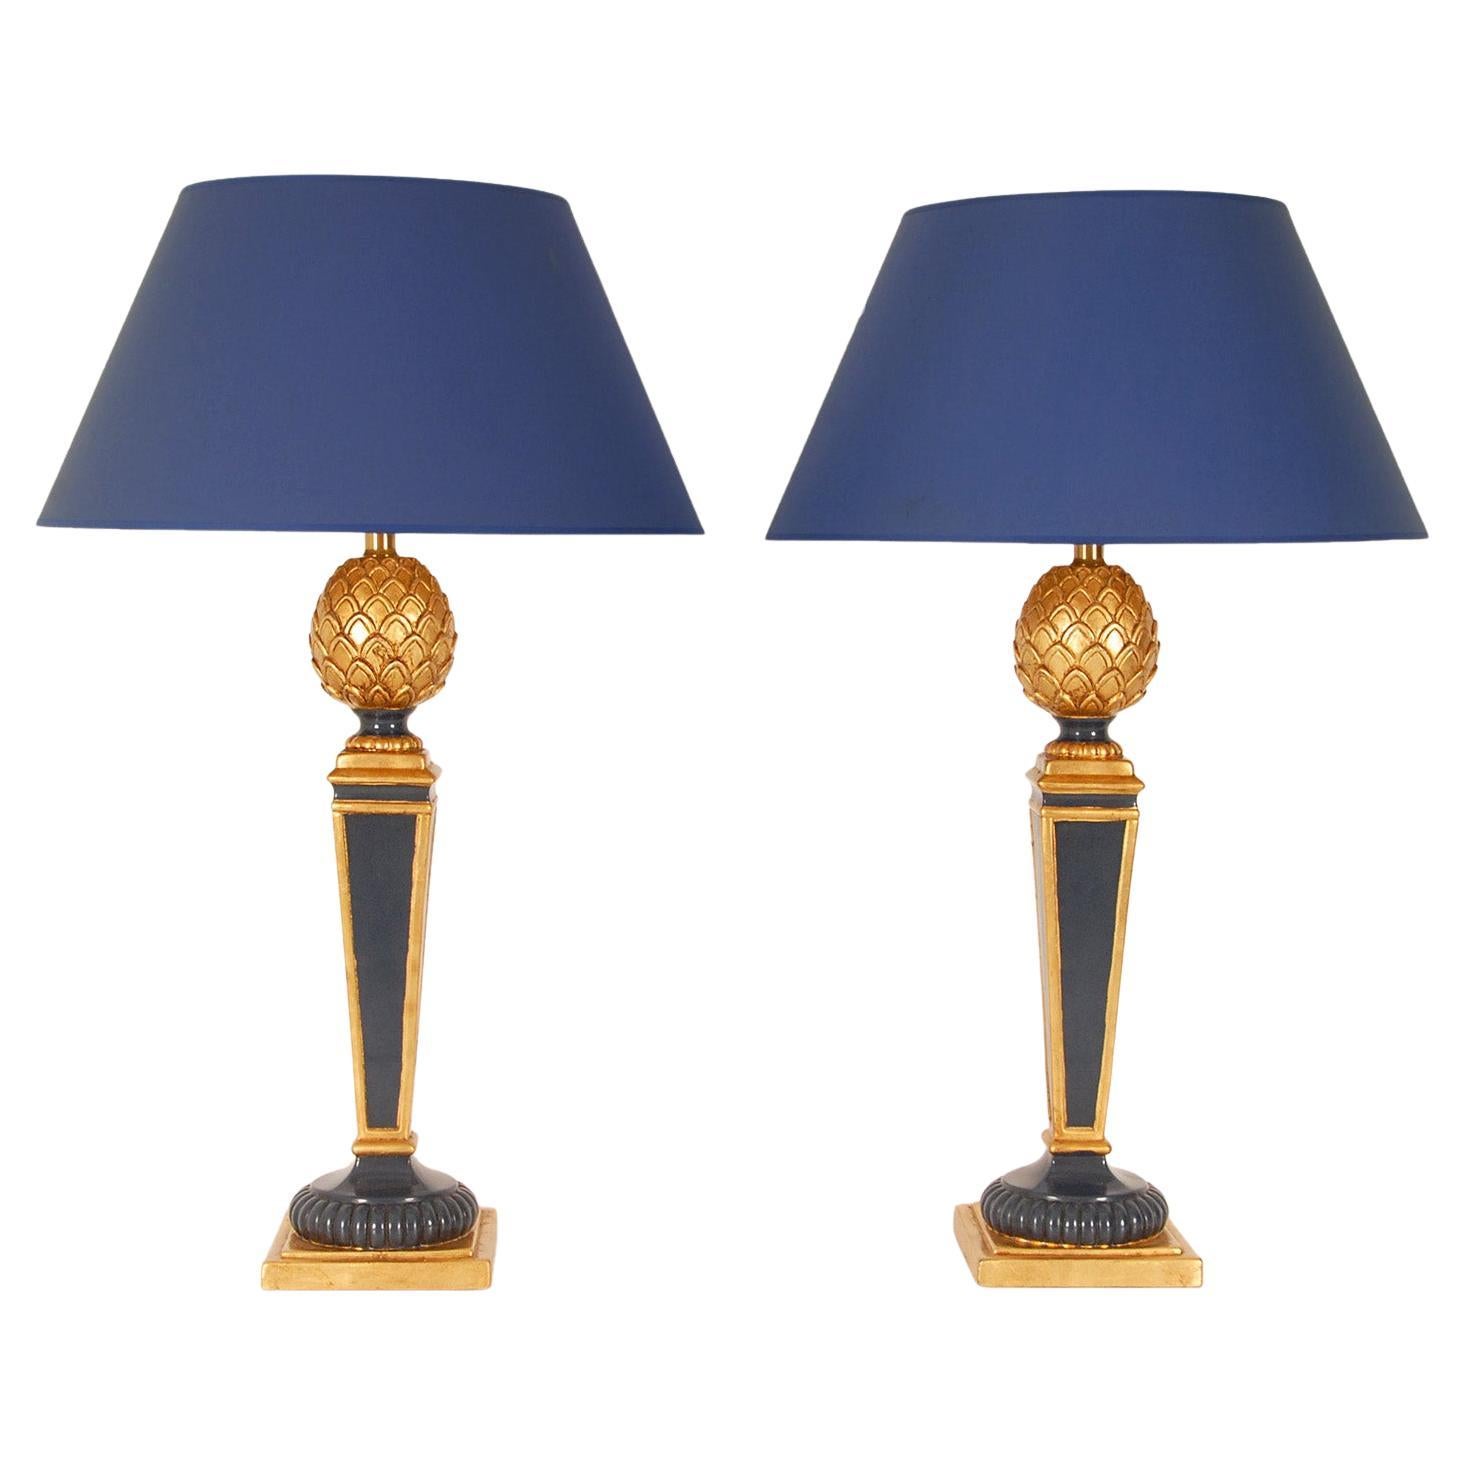 Vintage French High End Lamps Blue Gold Giltwood Pineapple Table Lamps, a Pair